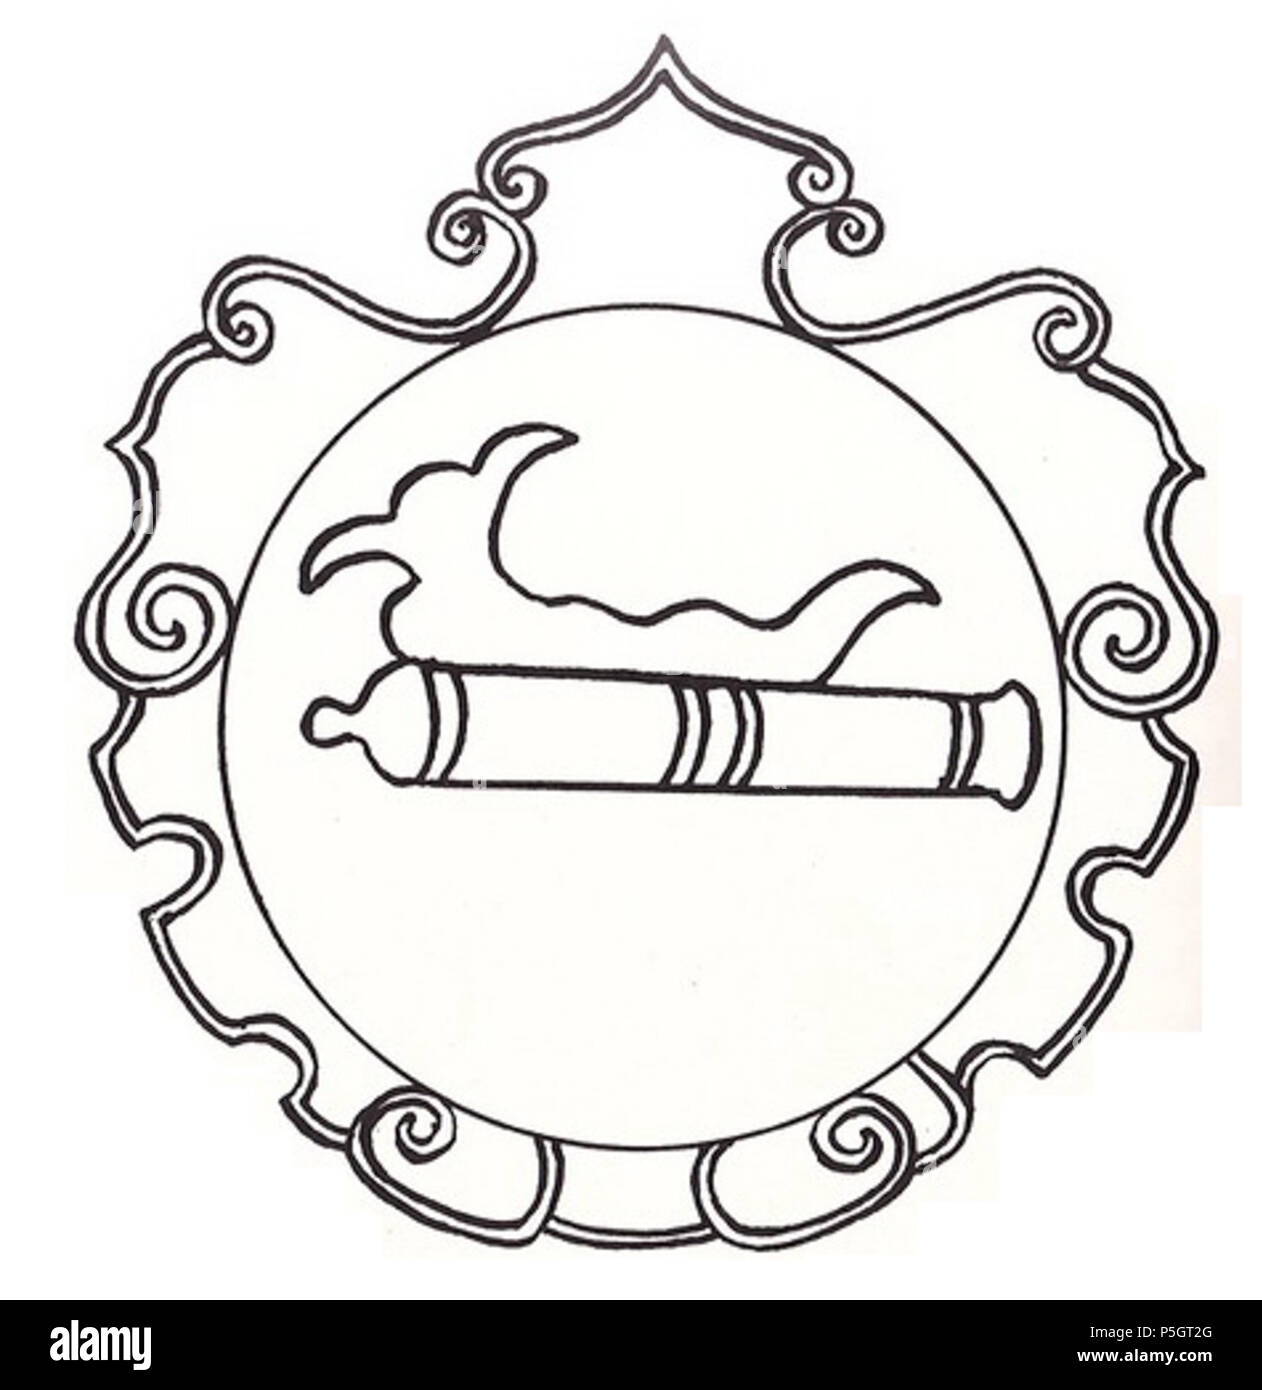 Coloring page magnanimous coat of arms of smolensk